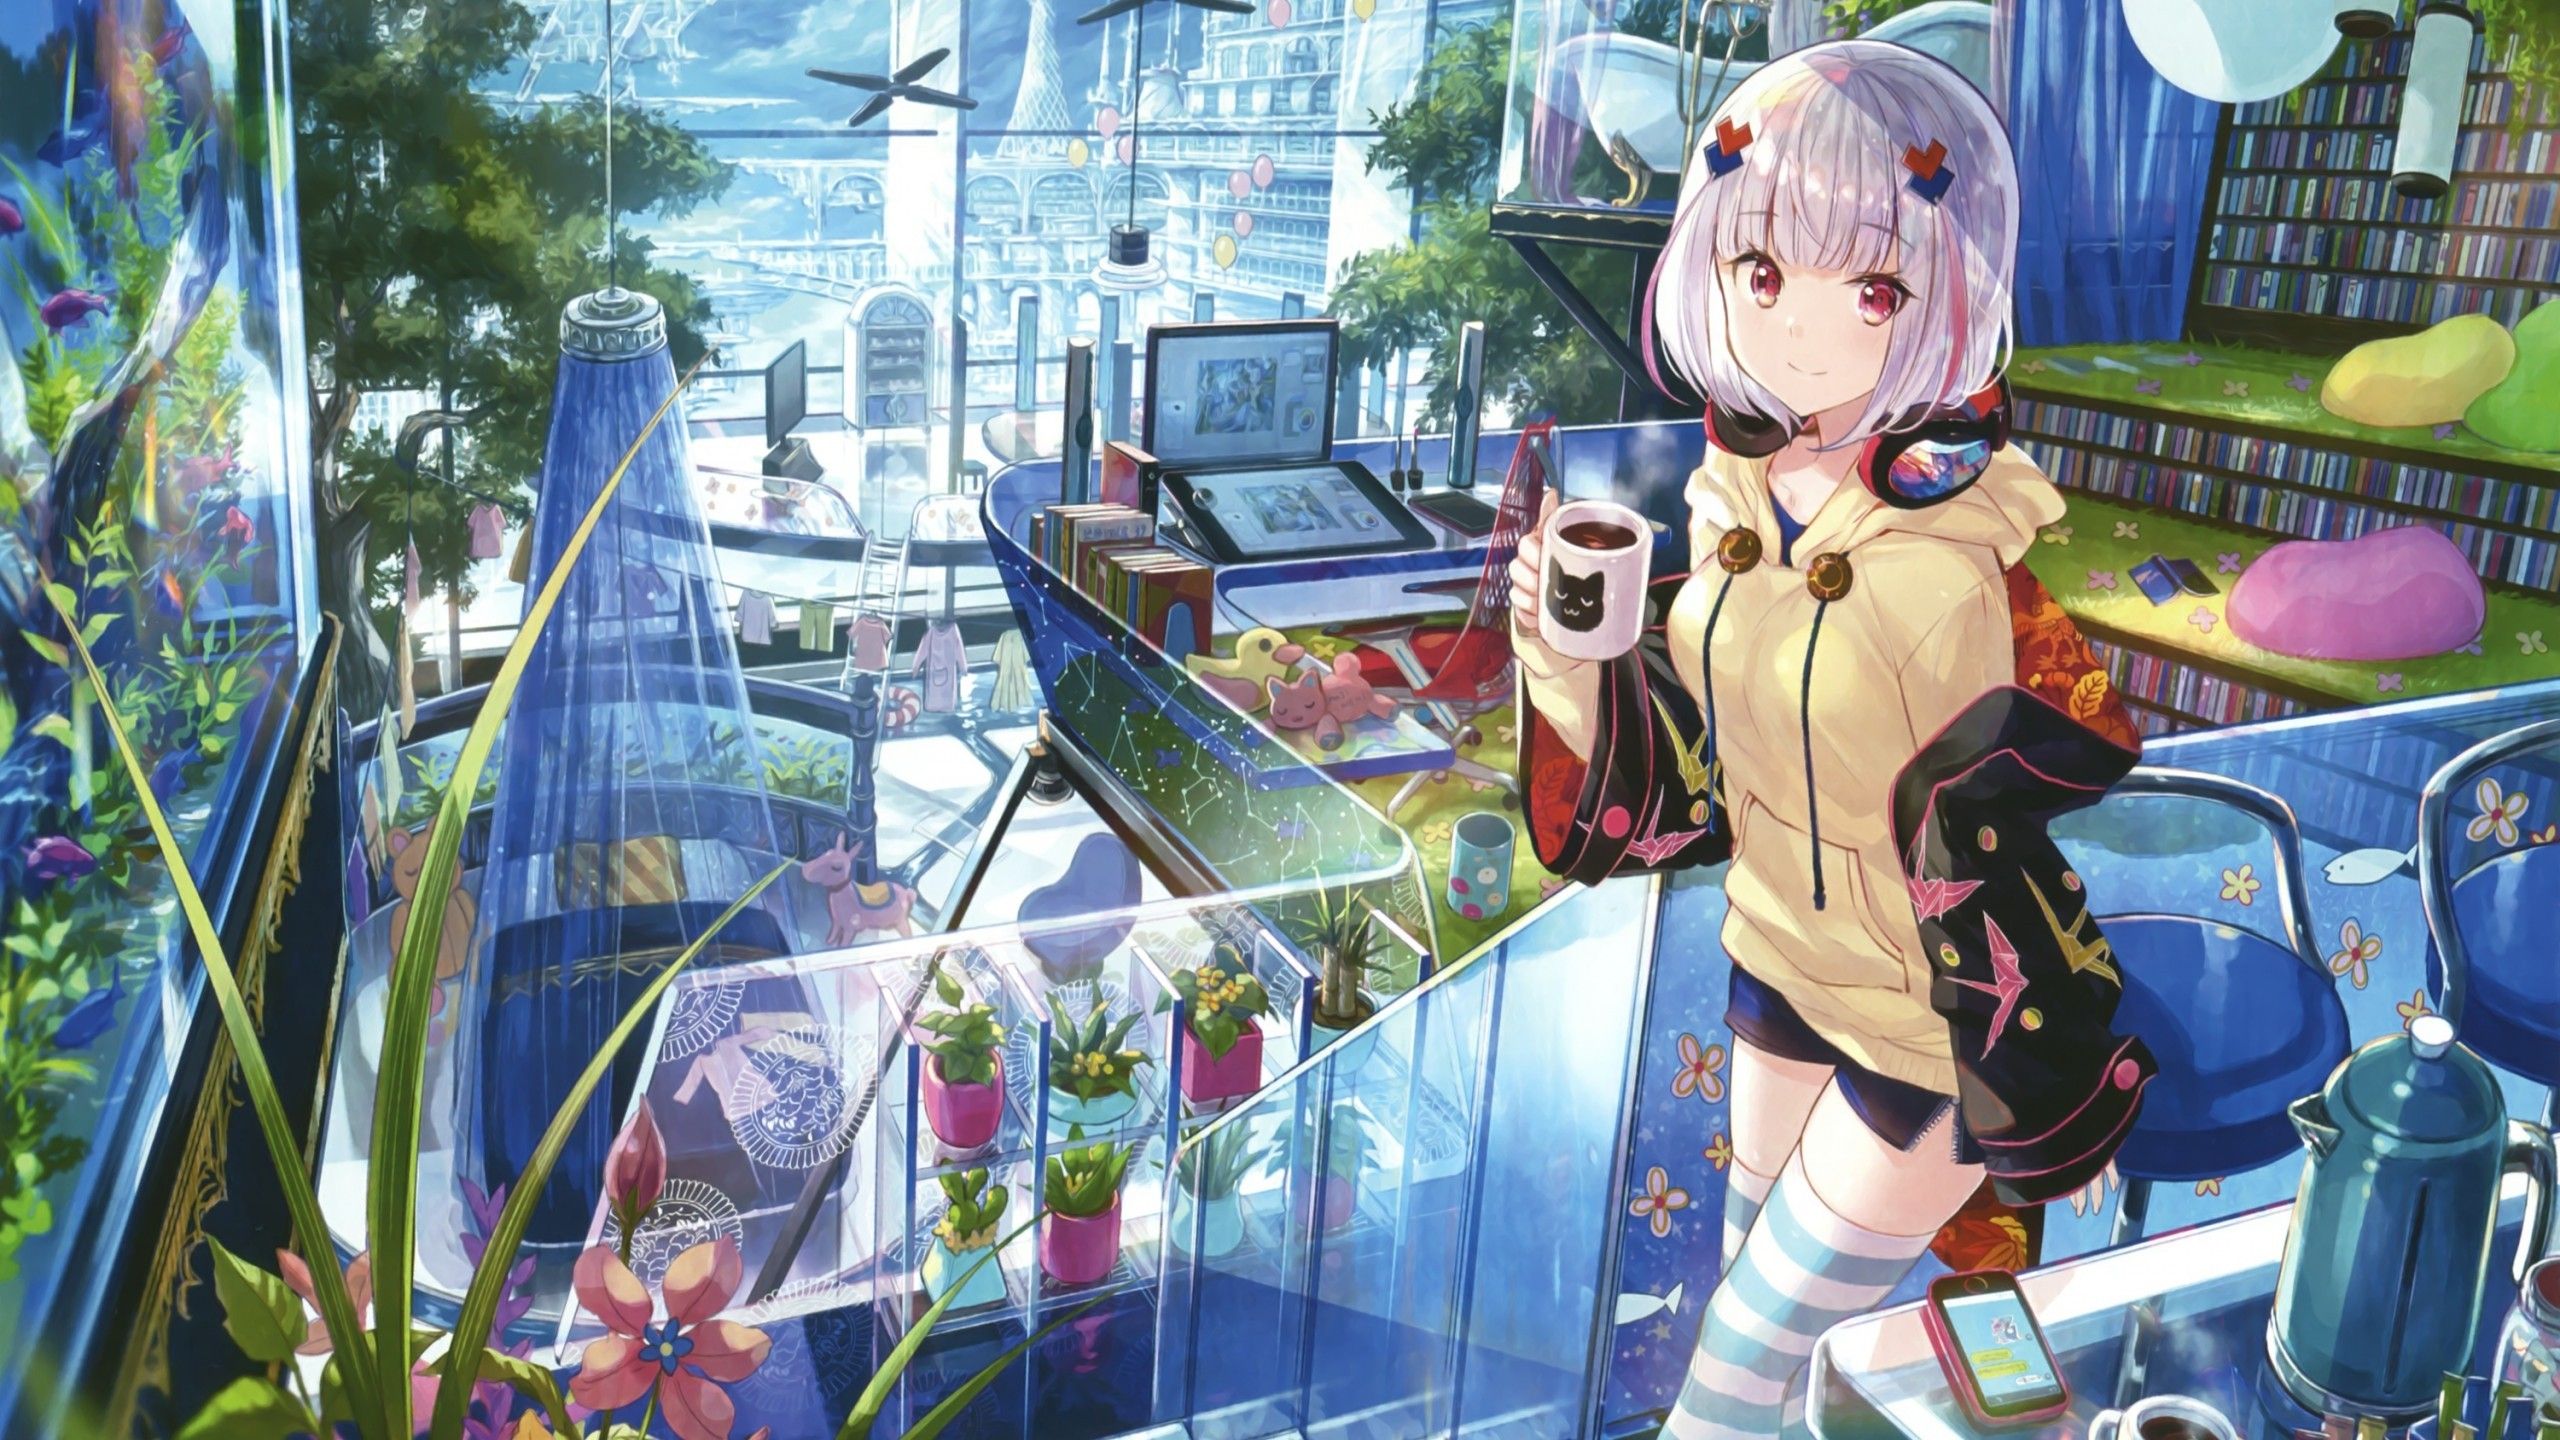 Download 2560x1440 Anime Girl, Futuristic City, Computer, Short Hair, Coffee Wallpaper for iMac 27 inch